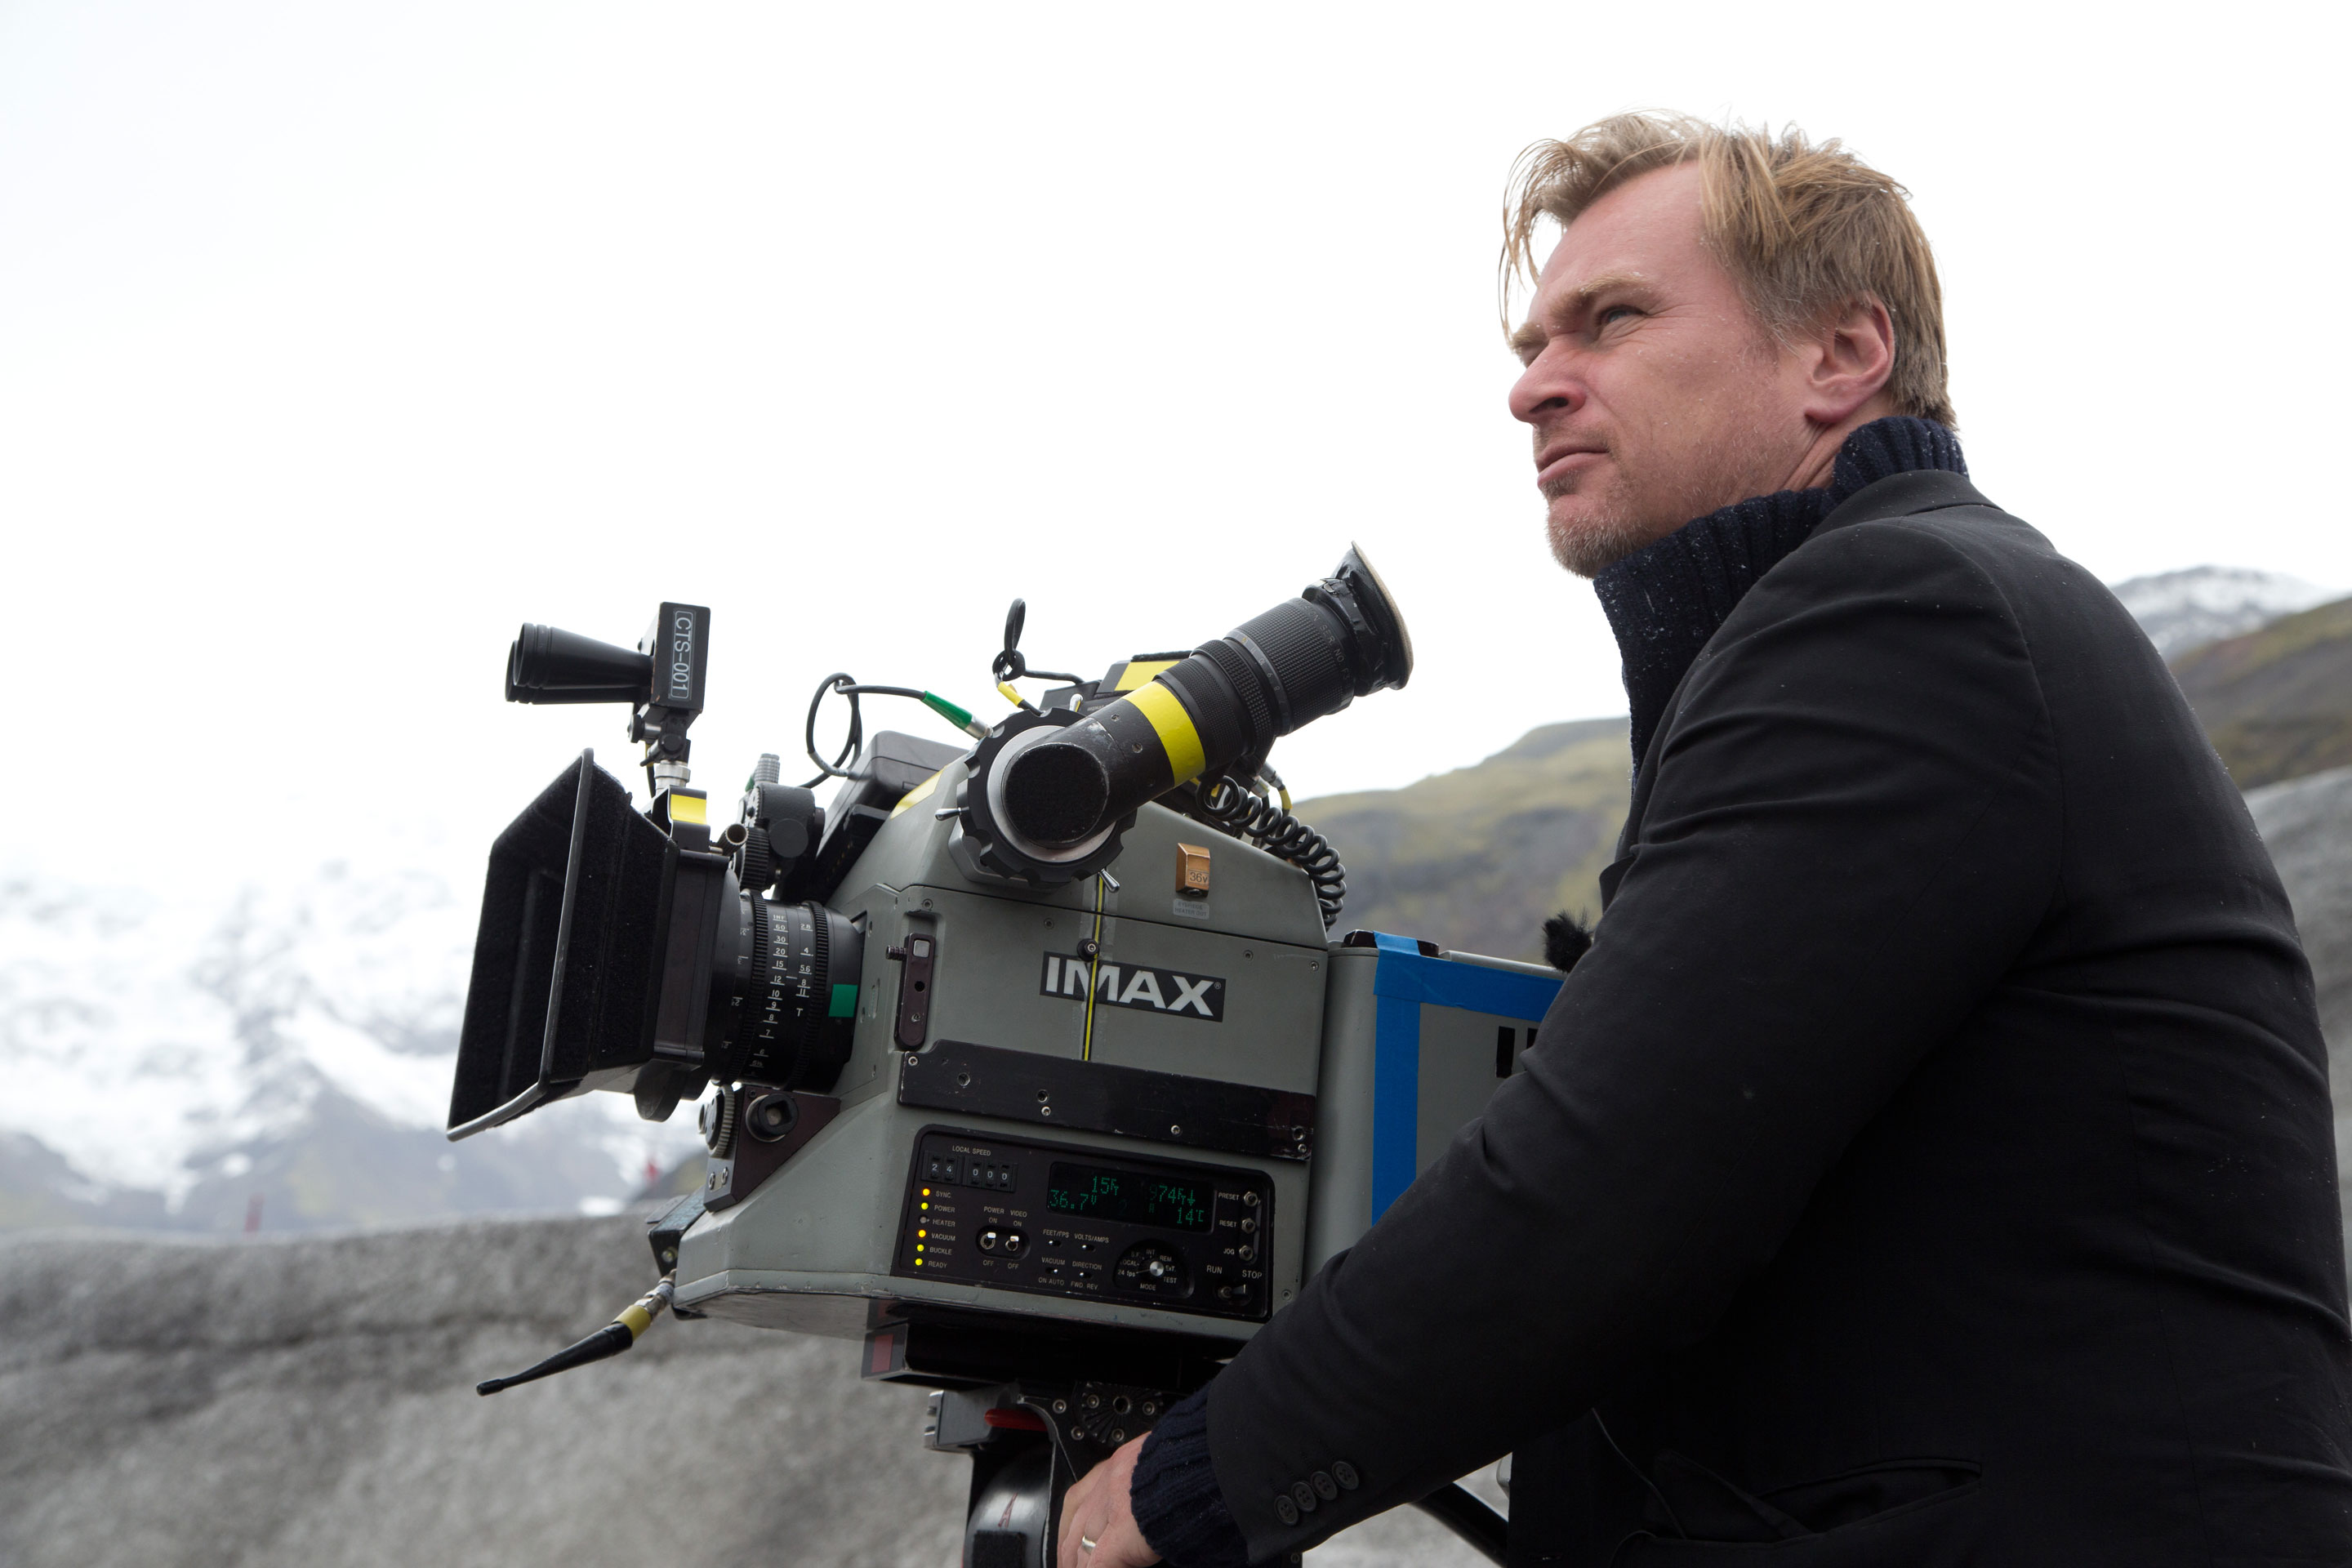 Christopher Nolan filming on the set of Interstellar. © 2014 Warner Bros. Entertainment. All rights reserved